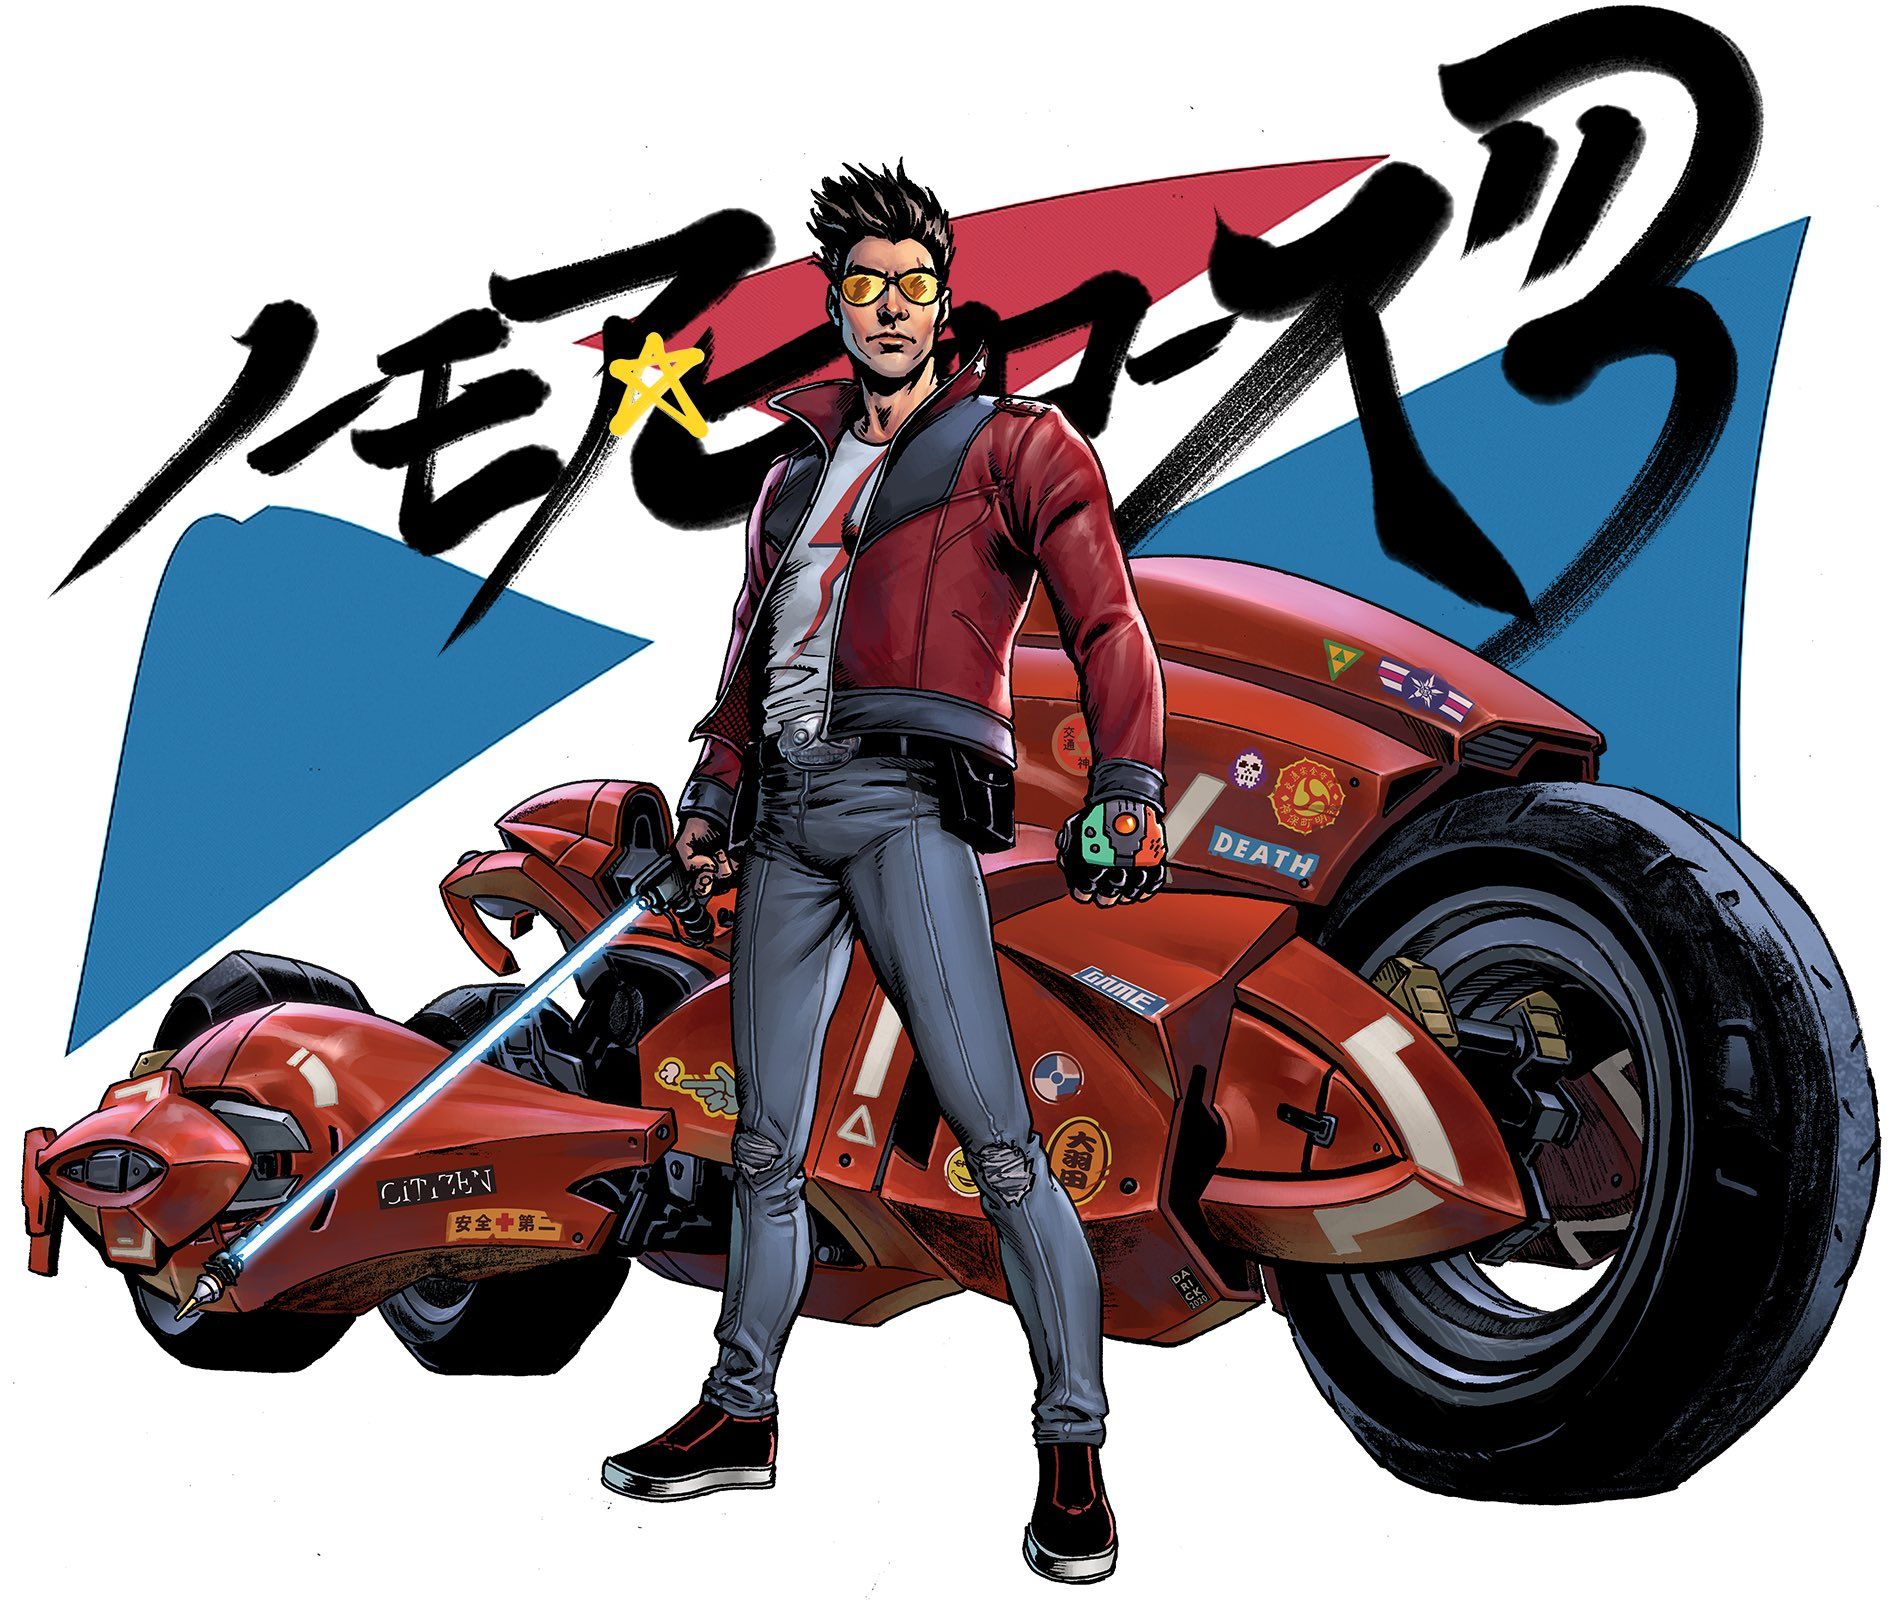 No More Heroes 3 Features Artists From Bayonetta Punpun The Boys And More